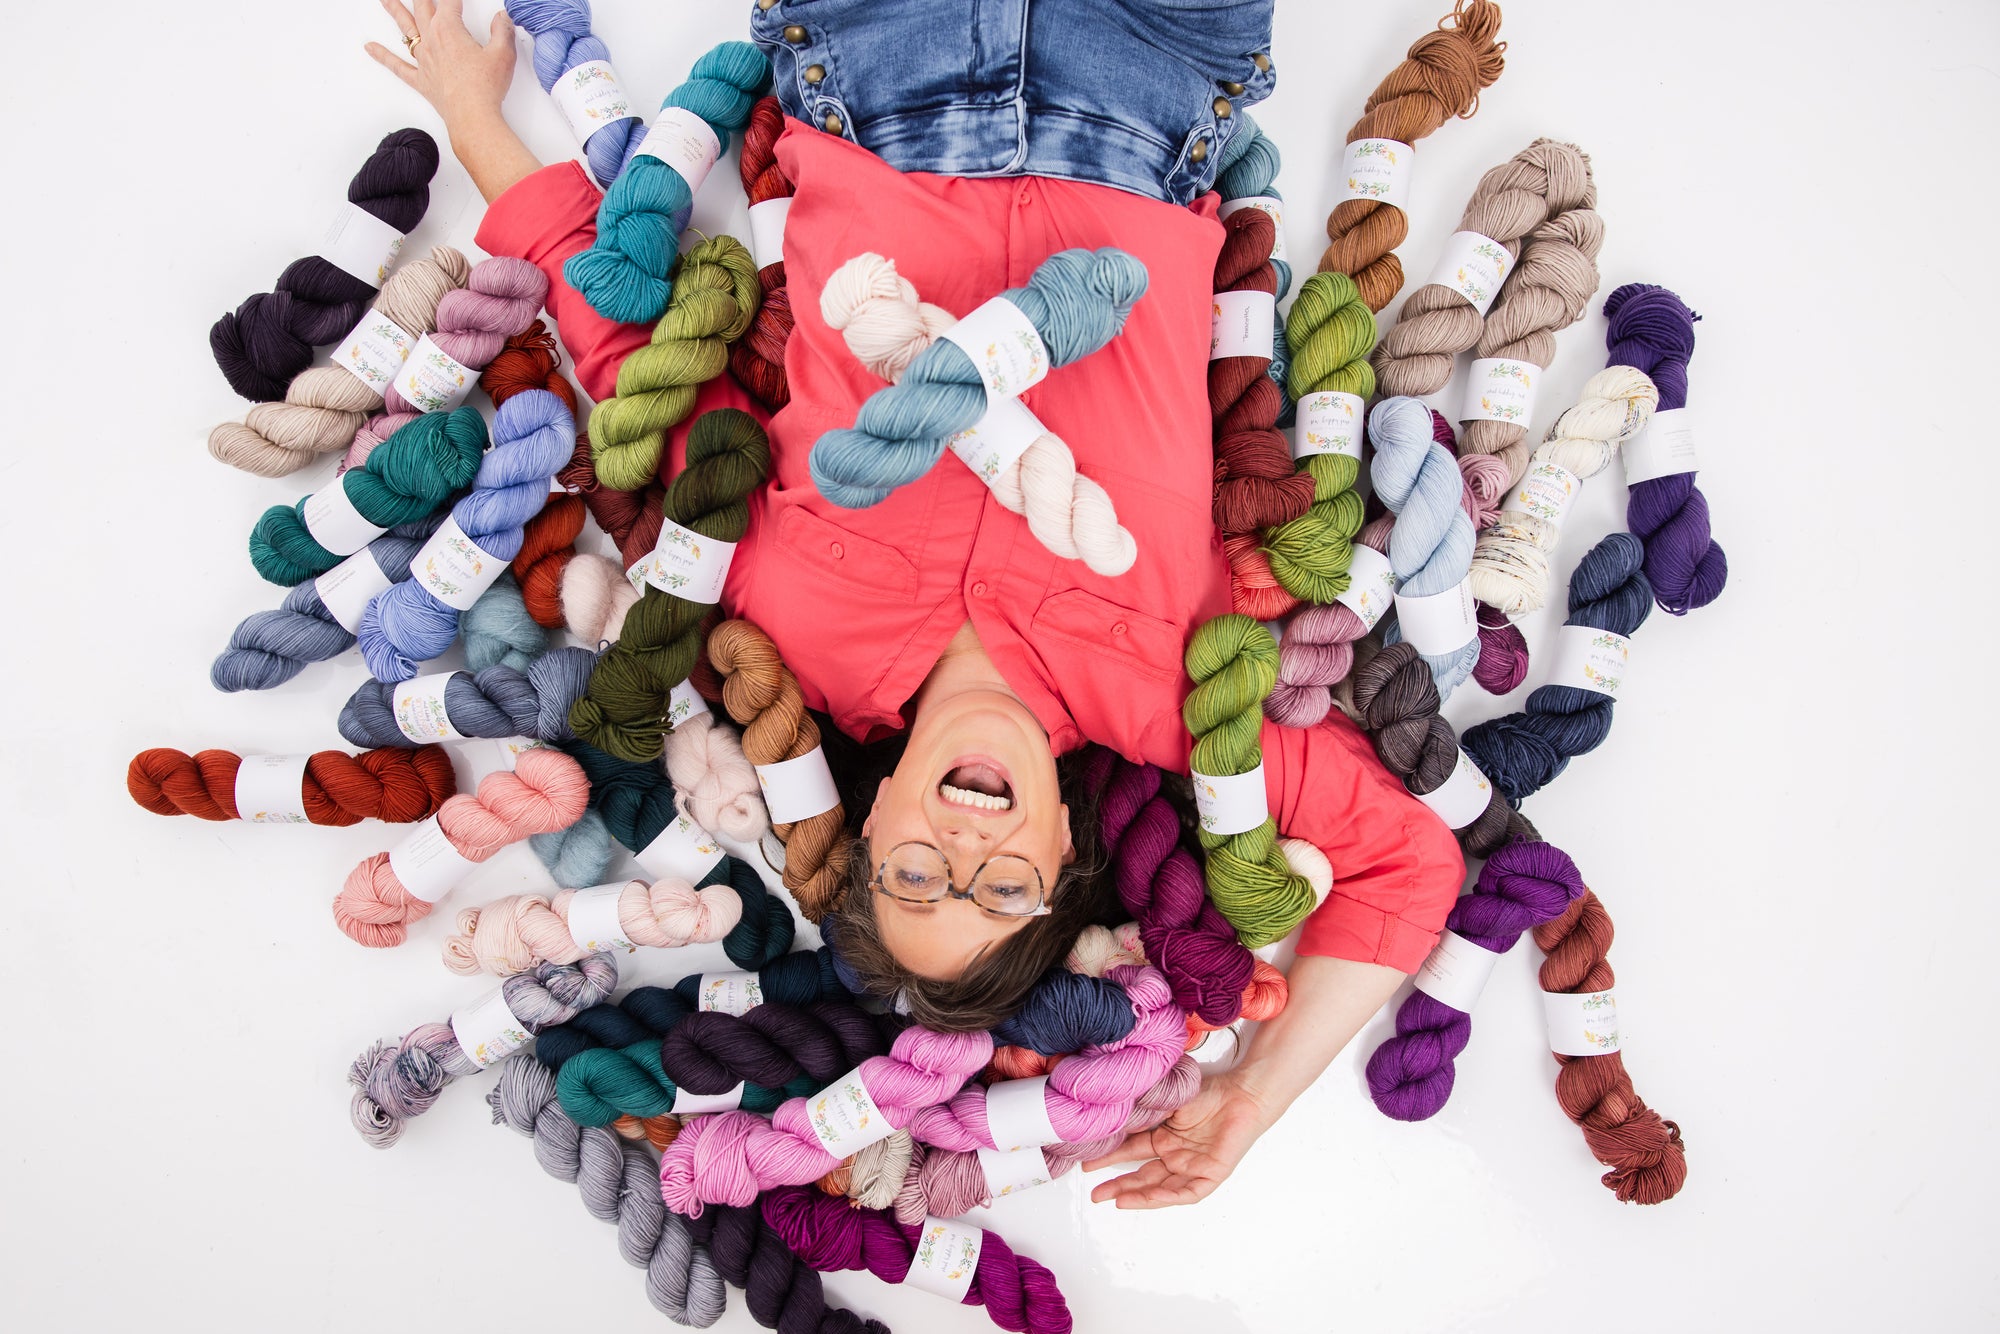 A woman is laying on a white background surrounded by skeins of yarn dyed in many different colors. She is laughing and wearing a bright coral shirt. She has brown hair and glasses.